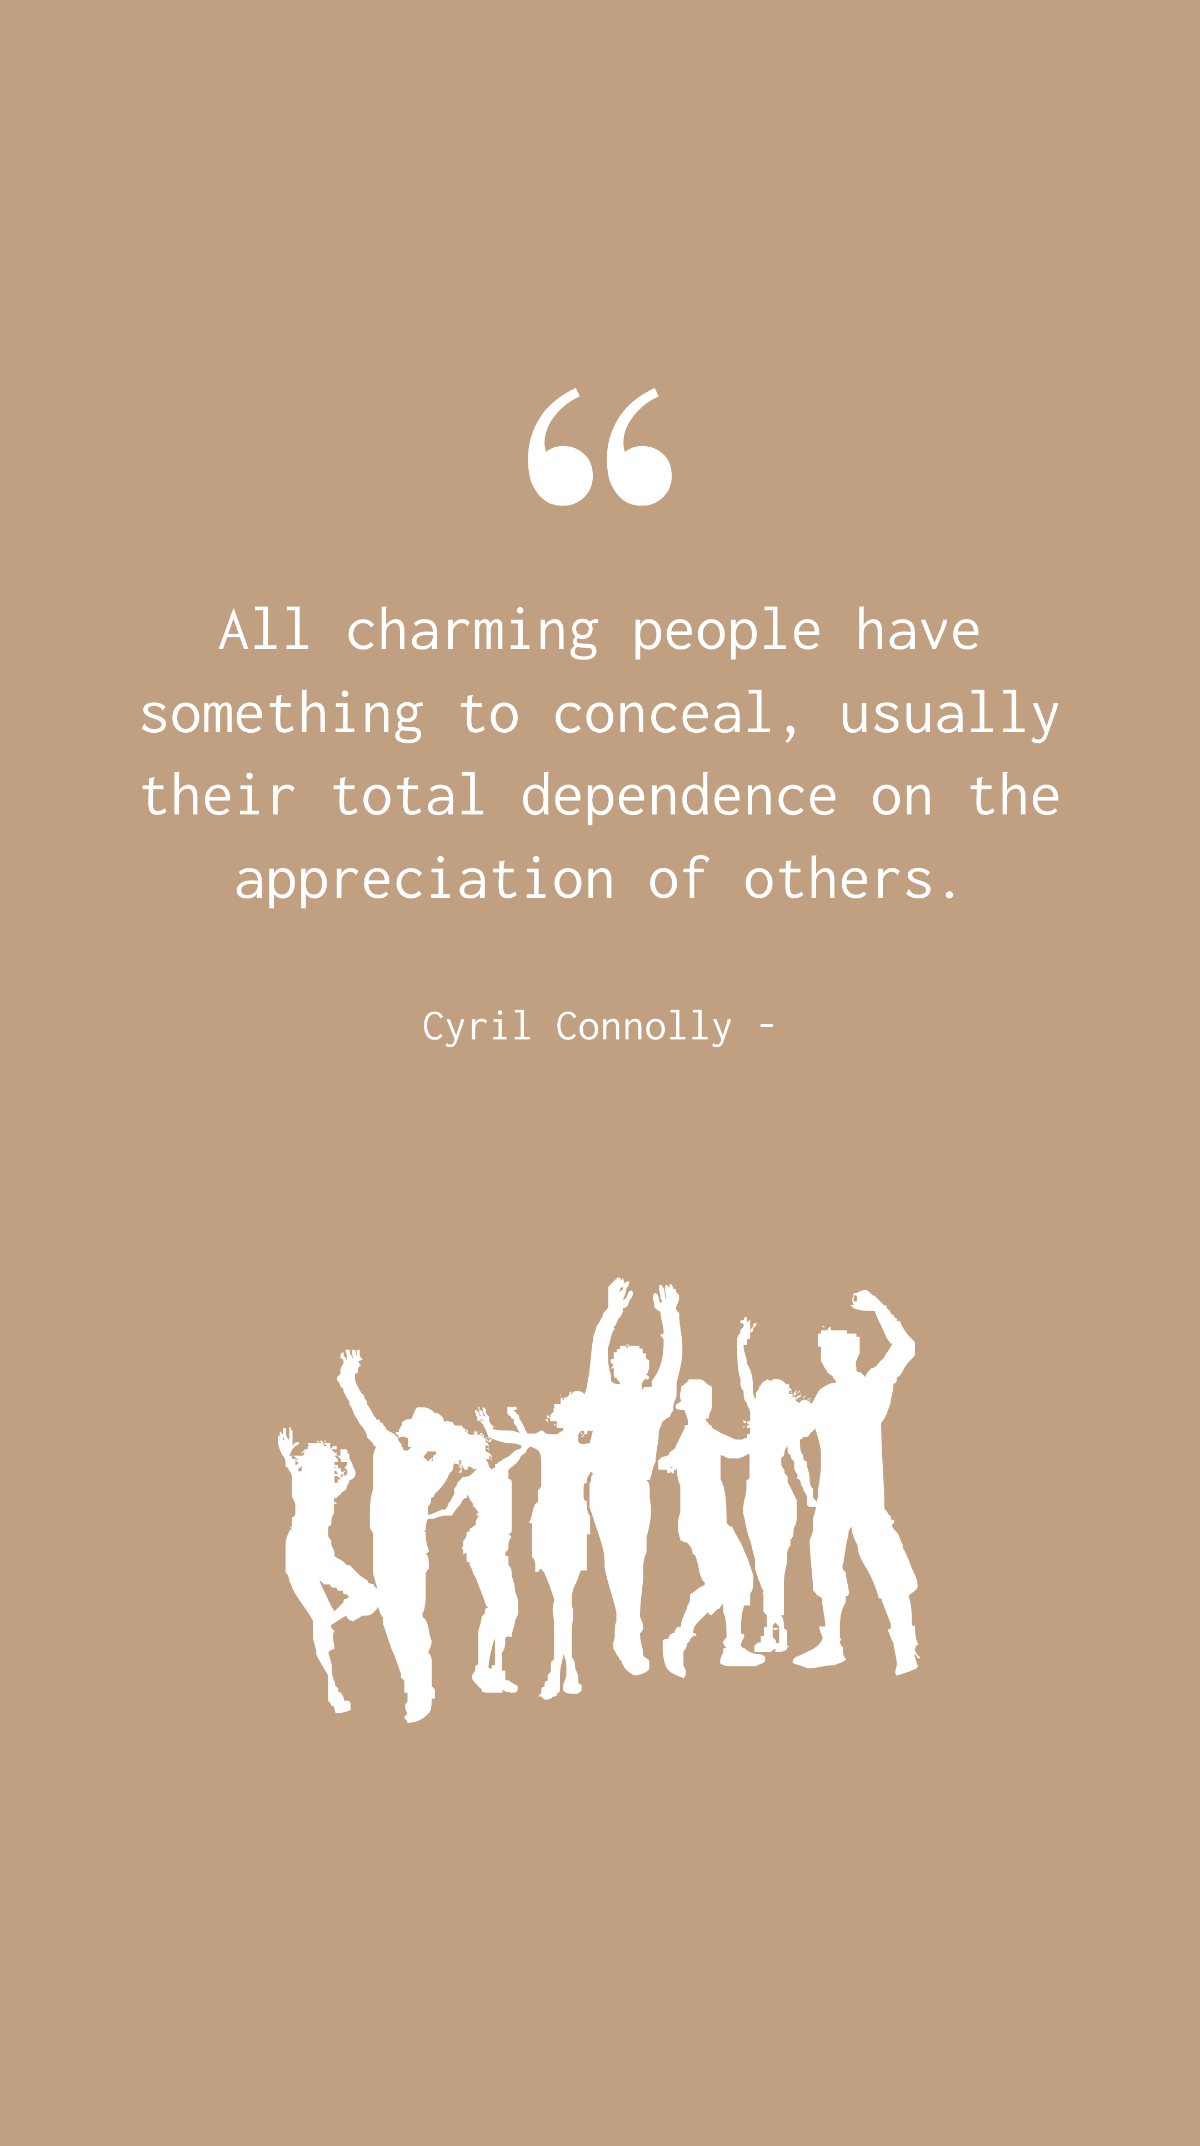 Cyril Connolly - All charming people have something to conceal, usually their total dependence on the appreciation of others. Template